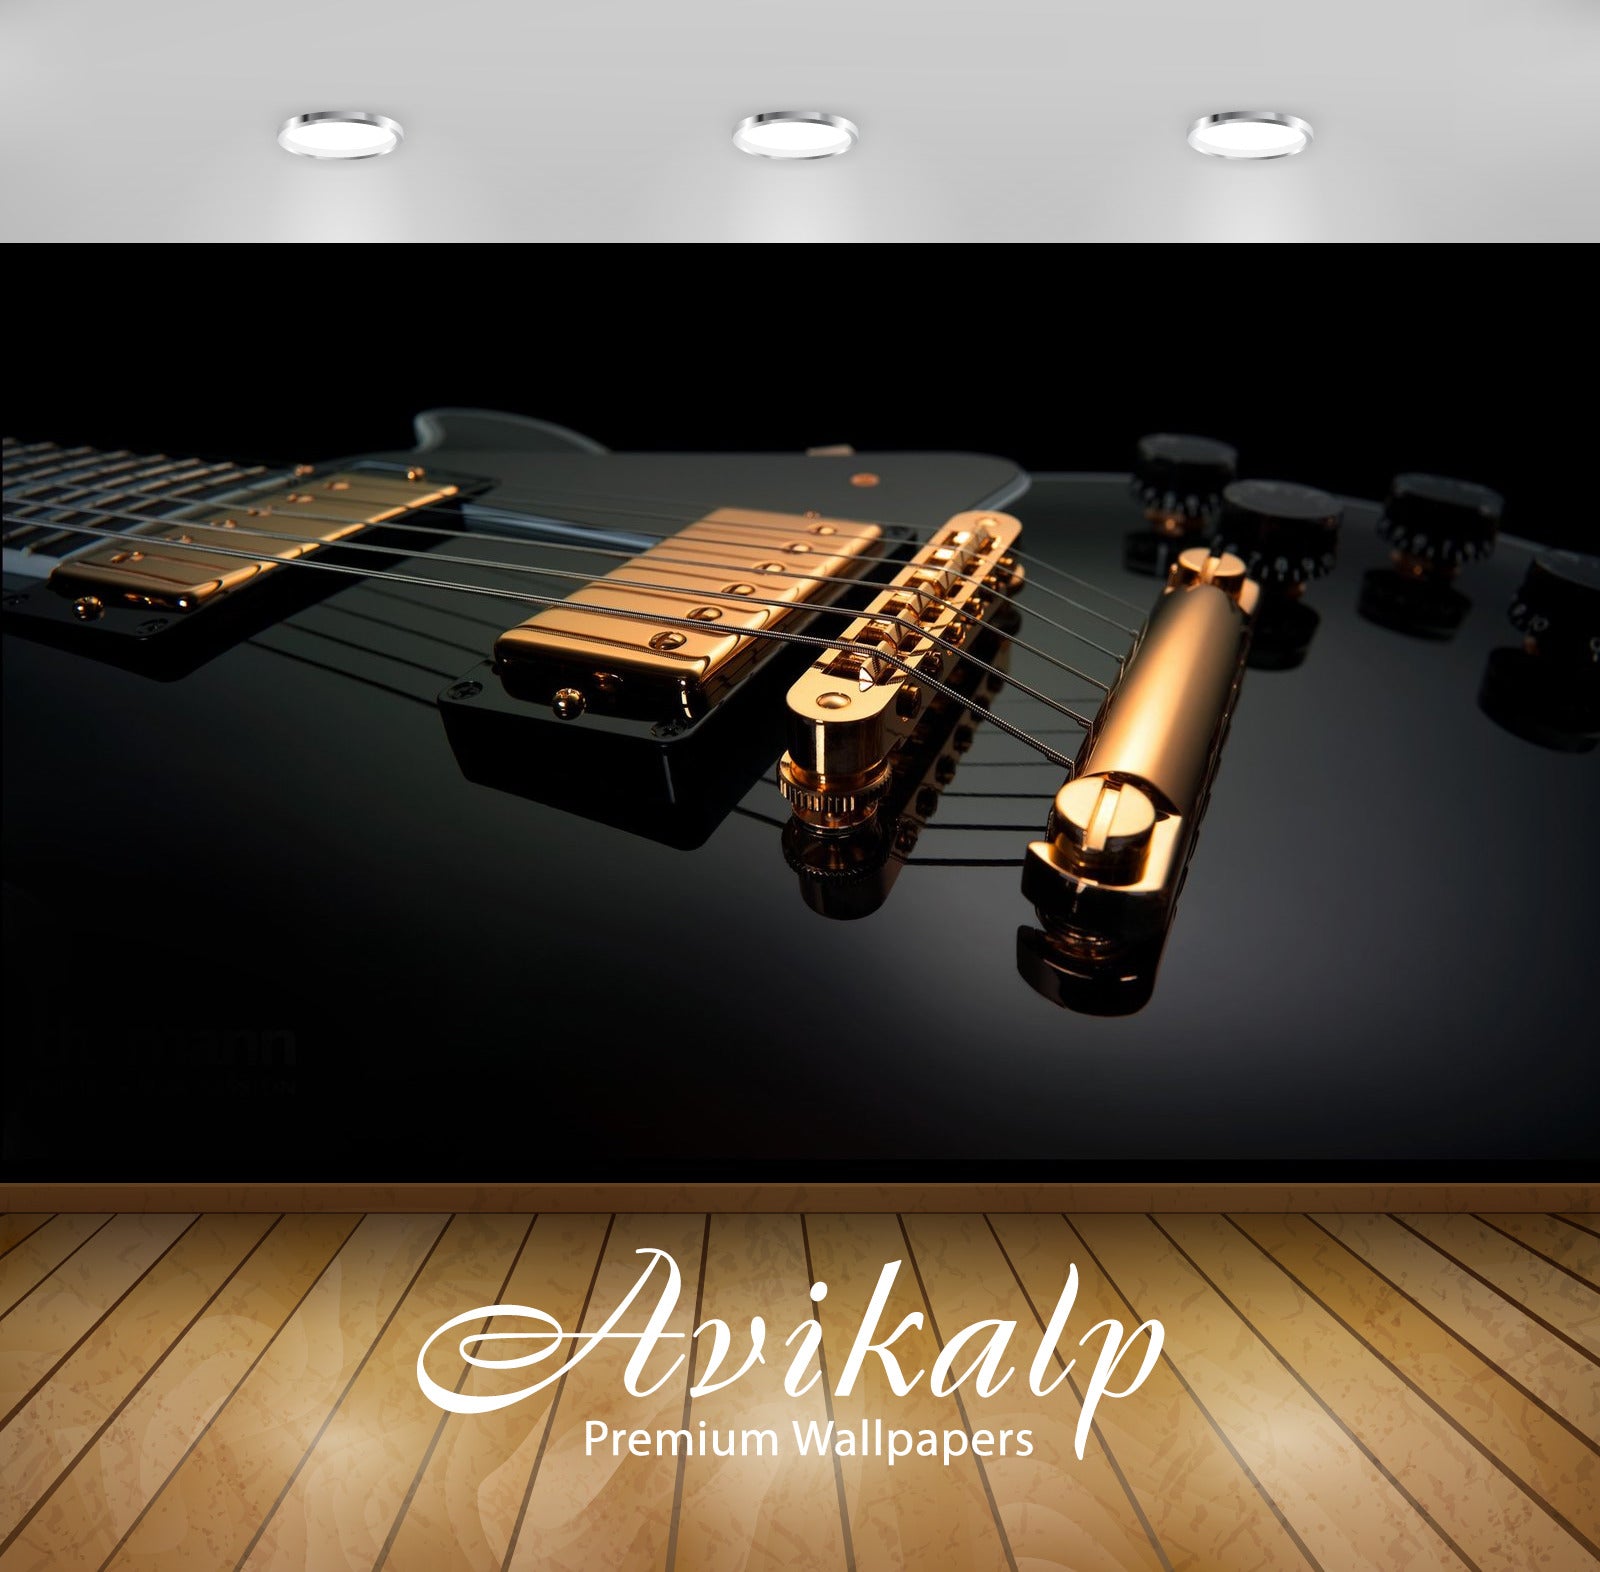 Avikalp Exclusive Guitar AWI1136 HD Wallpapers for Living room, Hall, Kids Room, Kitchen, TV Backgro